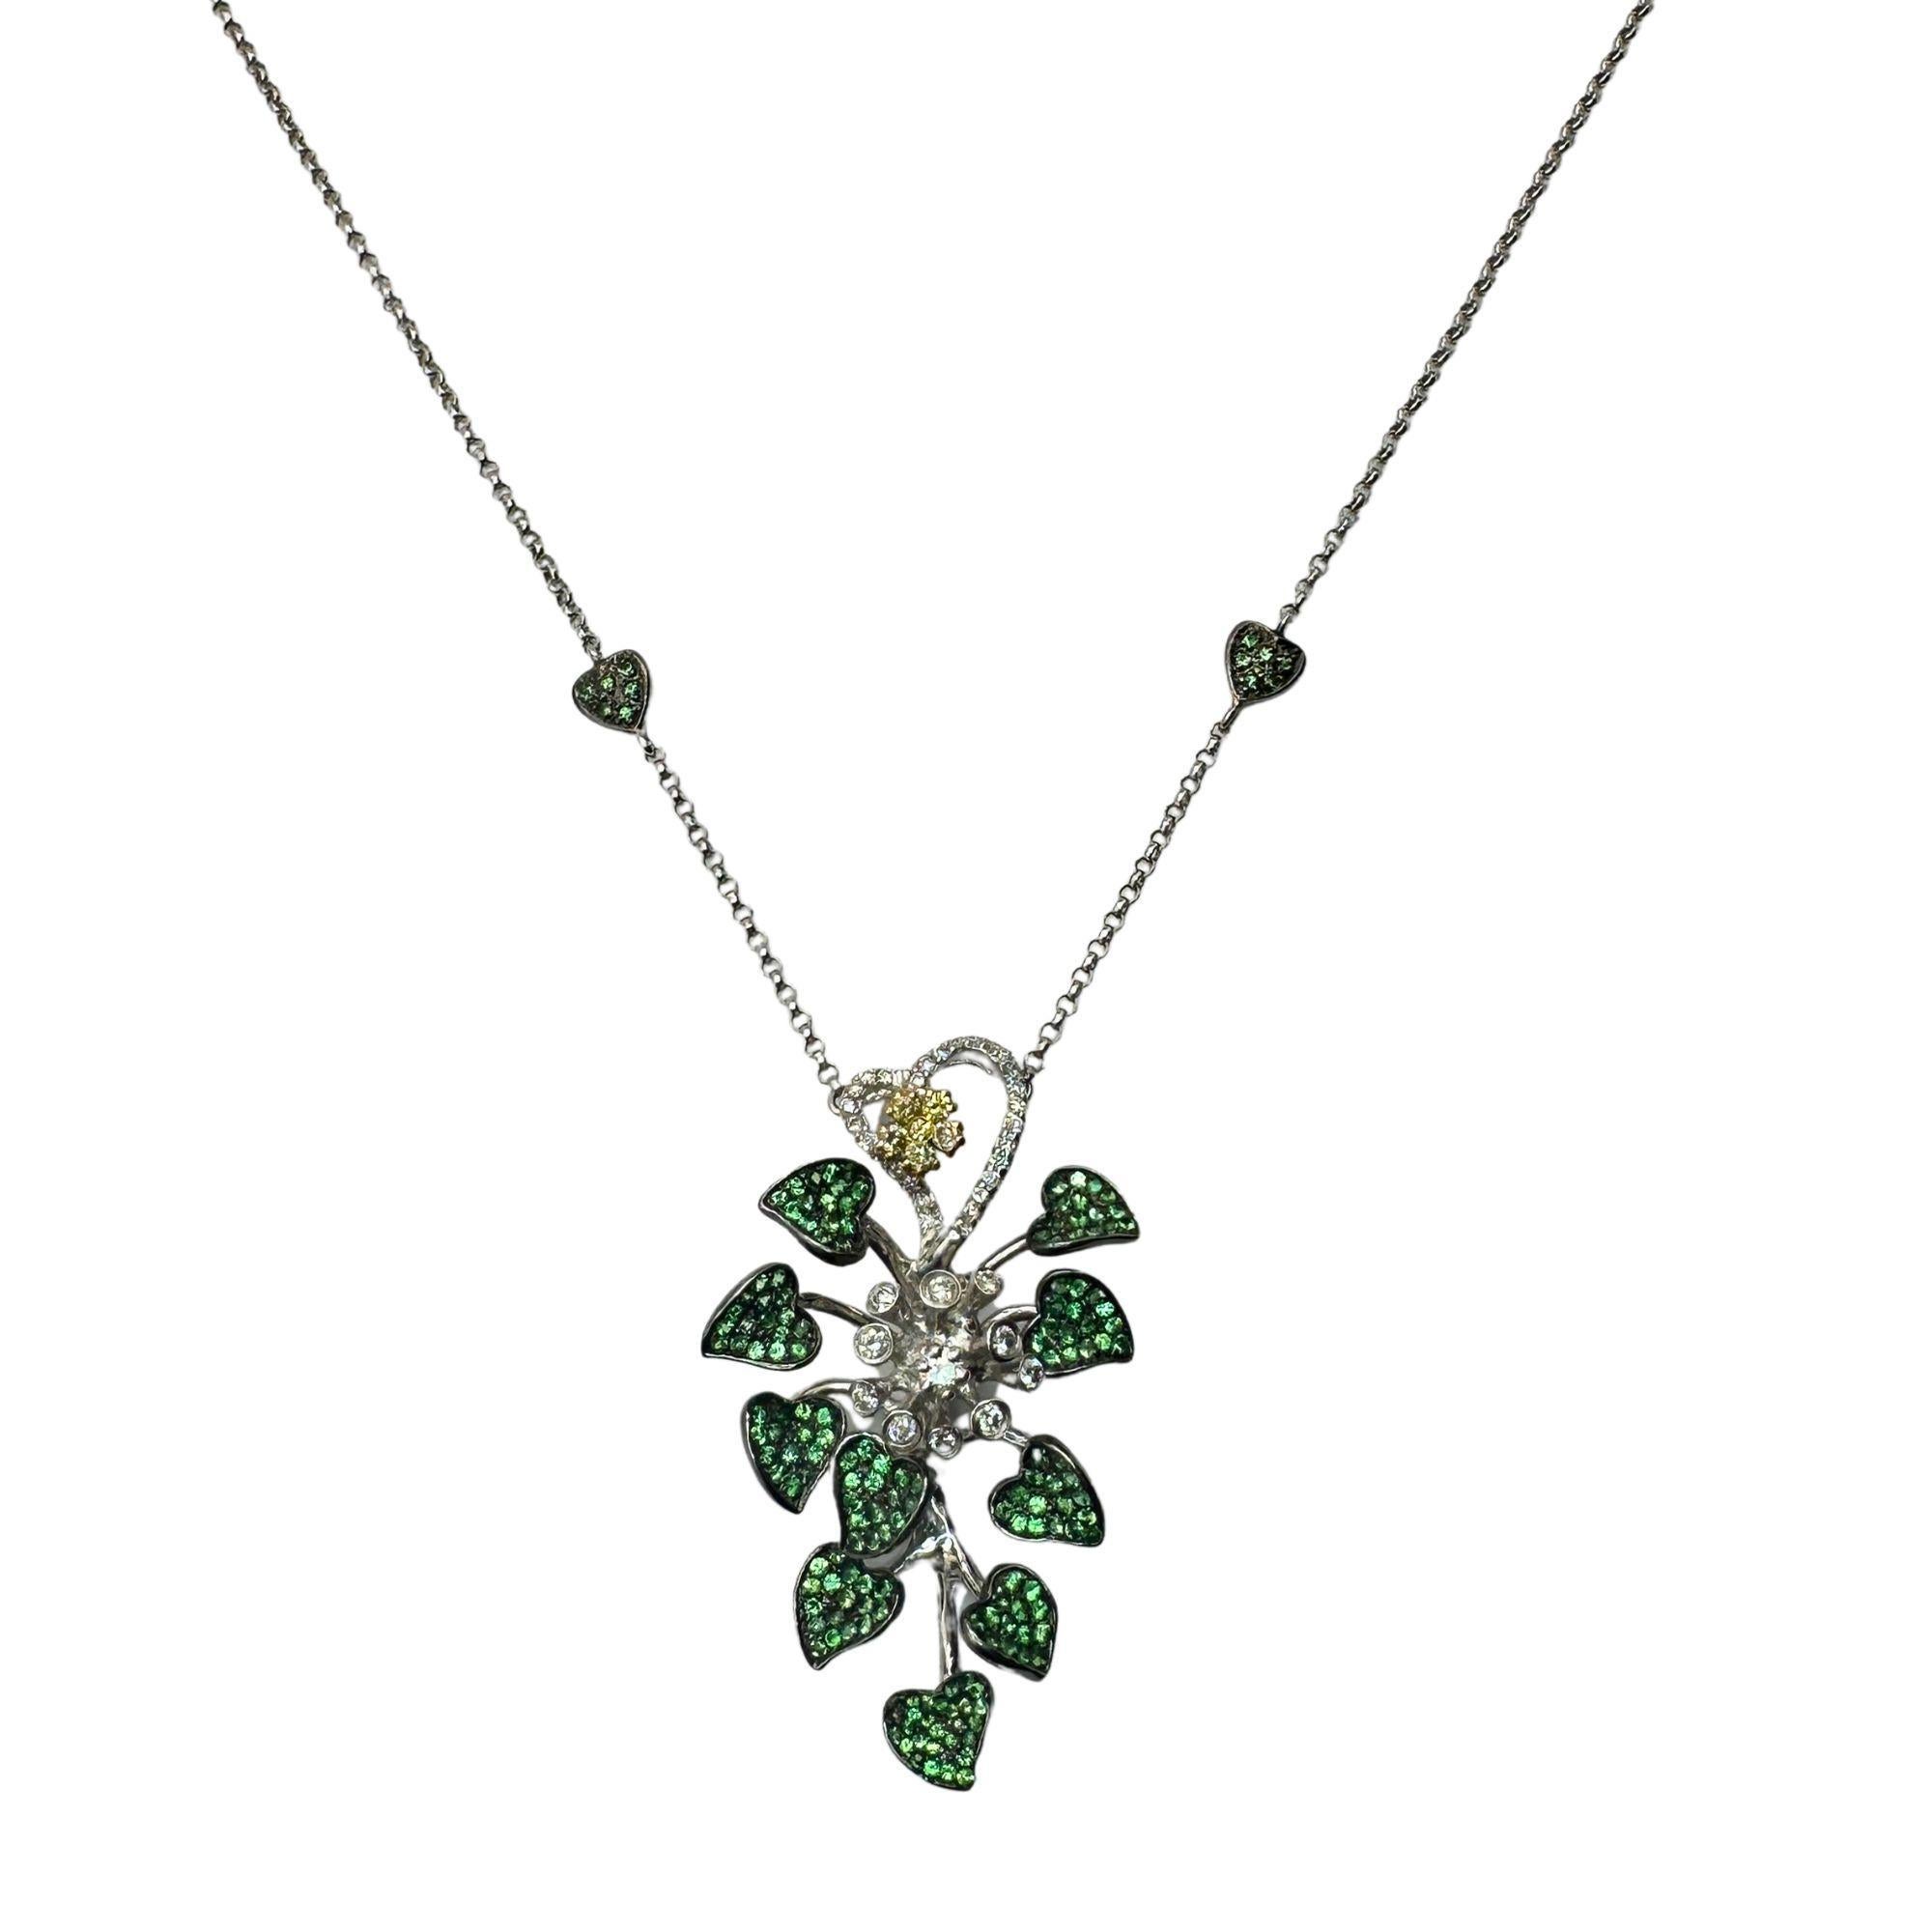 Add a touch of elegance with this 18k White and Yellow Diamond and Green Garnet Necklace. The 15.5 inch chain beautifully showcases a 1.75 inch pendant, totaling 17.25 inches in length. With a total weight of 13.57 grams, this necklace is crafted in